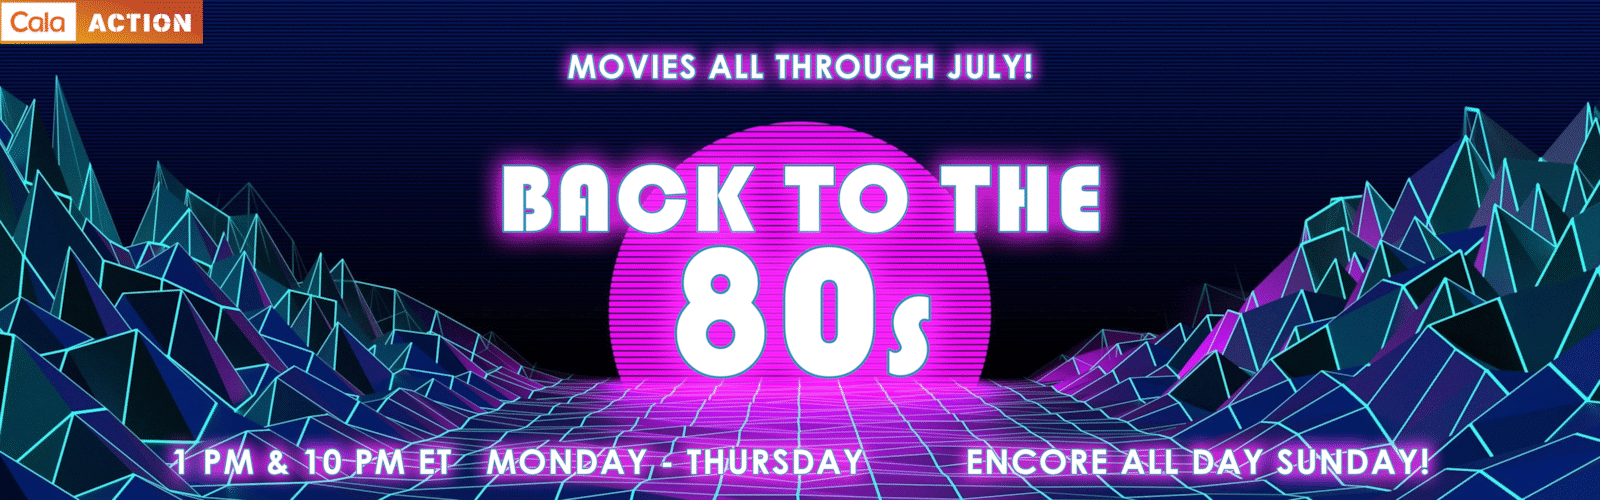 80s Movies Web Banner Image